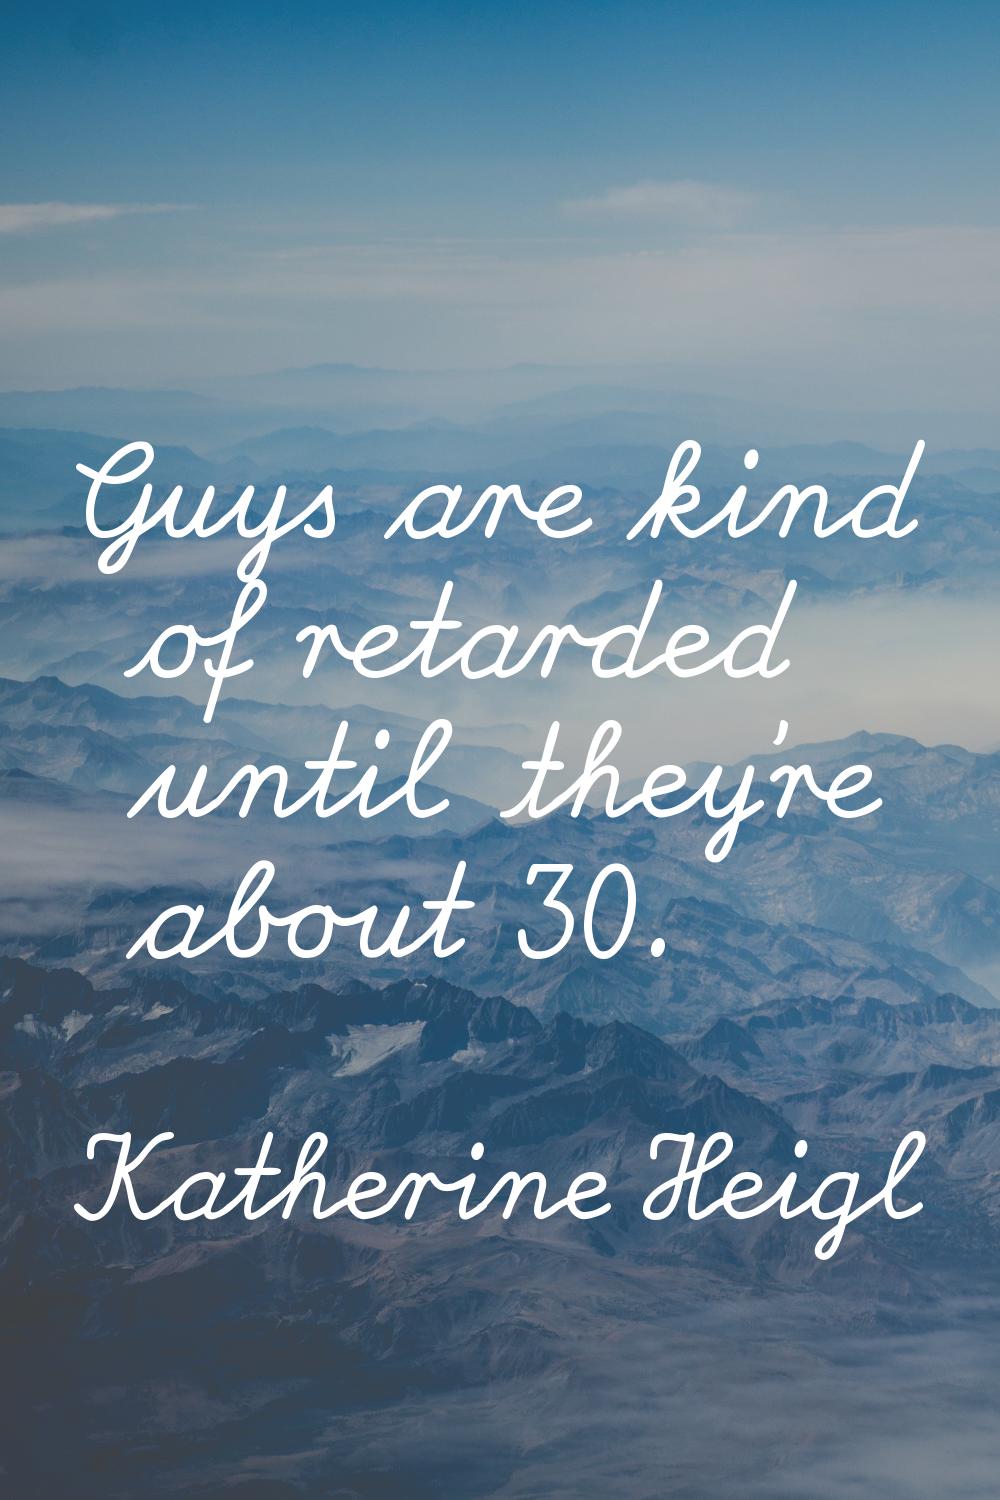 Guys are kind of retarded until they're about 30.